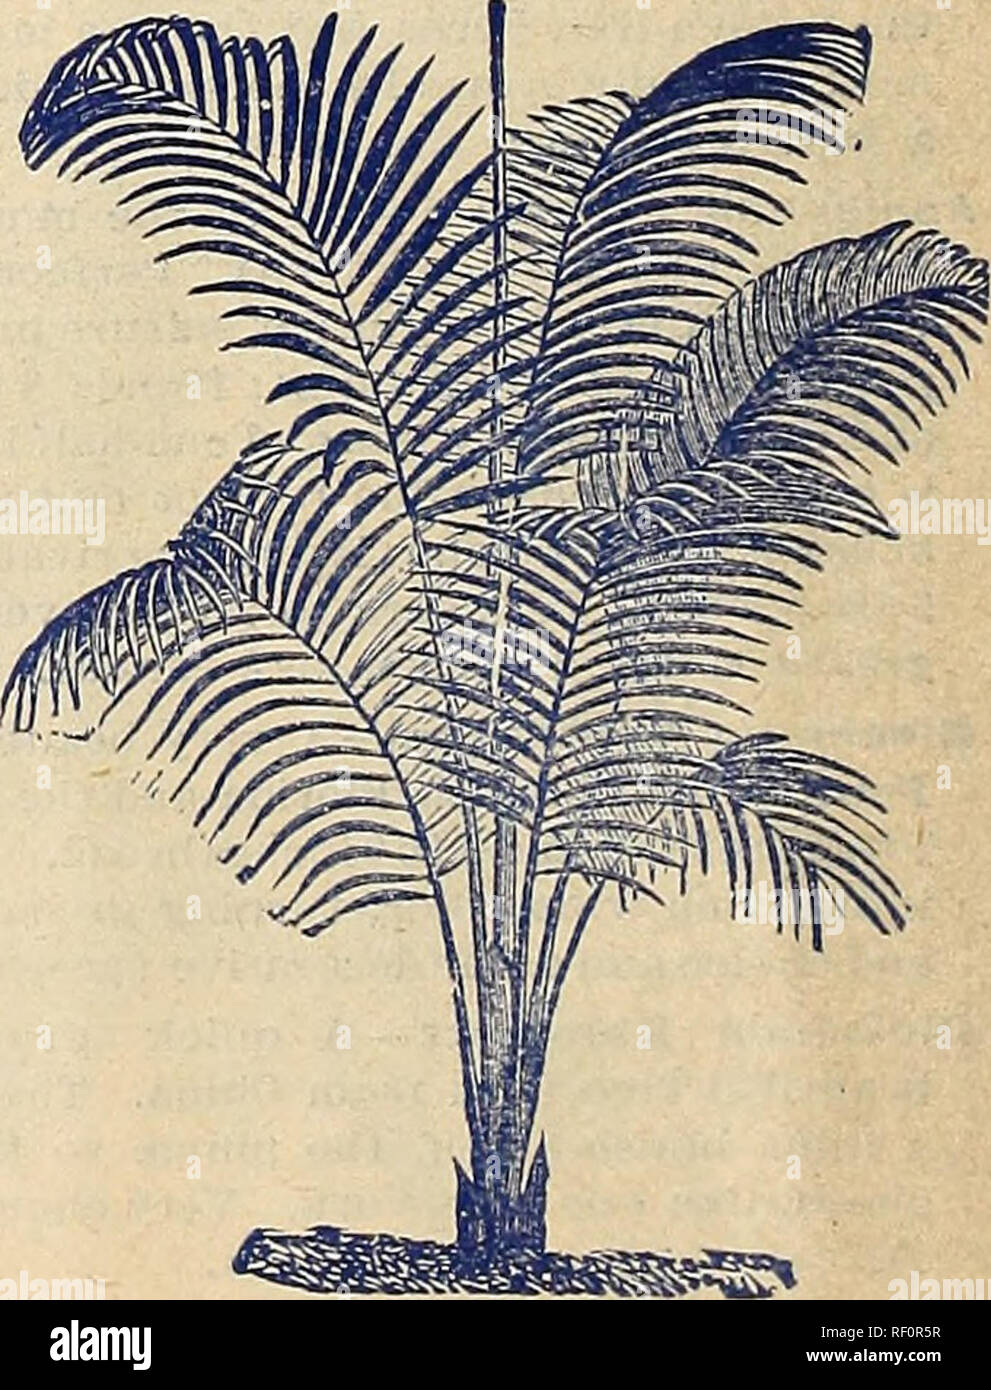 . Catalogue of rare Florida flowers and fruits : season of 1893. Nurseries (Horticulture) Florida Catalogs; Flowers Catalogs; Plants, Ornamental Catalogs. ]3iooi) Edale. This is in reality a Cycad, but is so closely related to the Palms that we give it a place here. It is a very curious and at the same time a very beautiful plant, and forms one of the most noble objects in a collection of ornamental-leaved plants. Leaves a light bluish-green, clothed at the base with white wooly hairs; in shape they are much like a Fern-leaf, but In texture very firm and remain on the plant for years. Thrives  Stock Photo